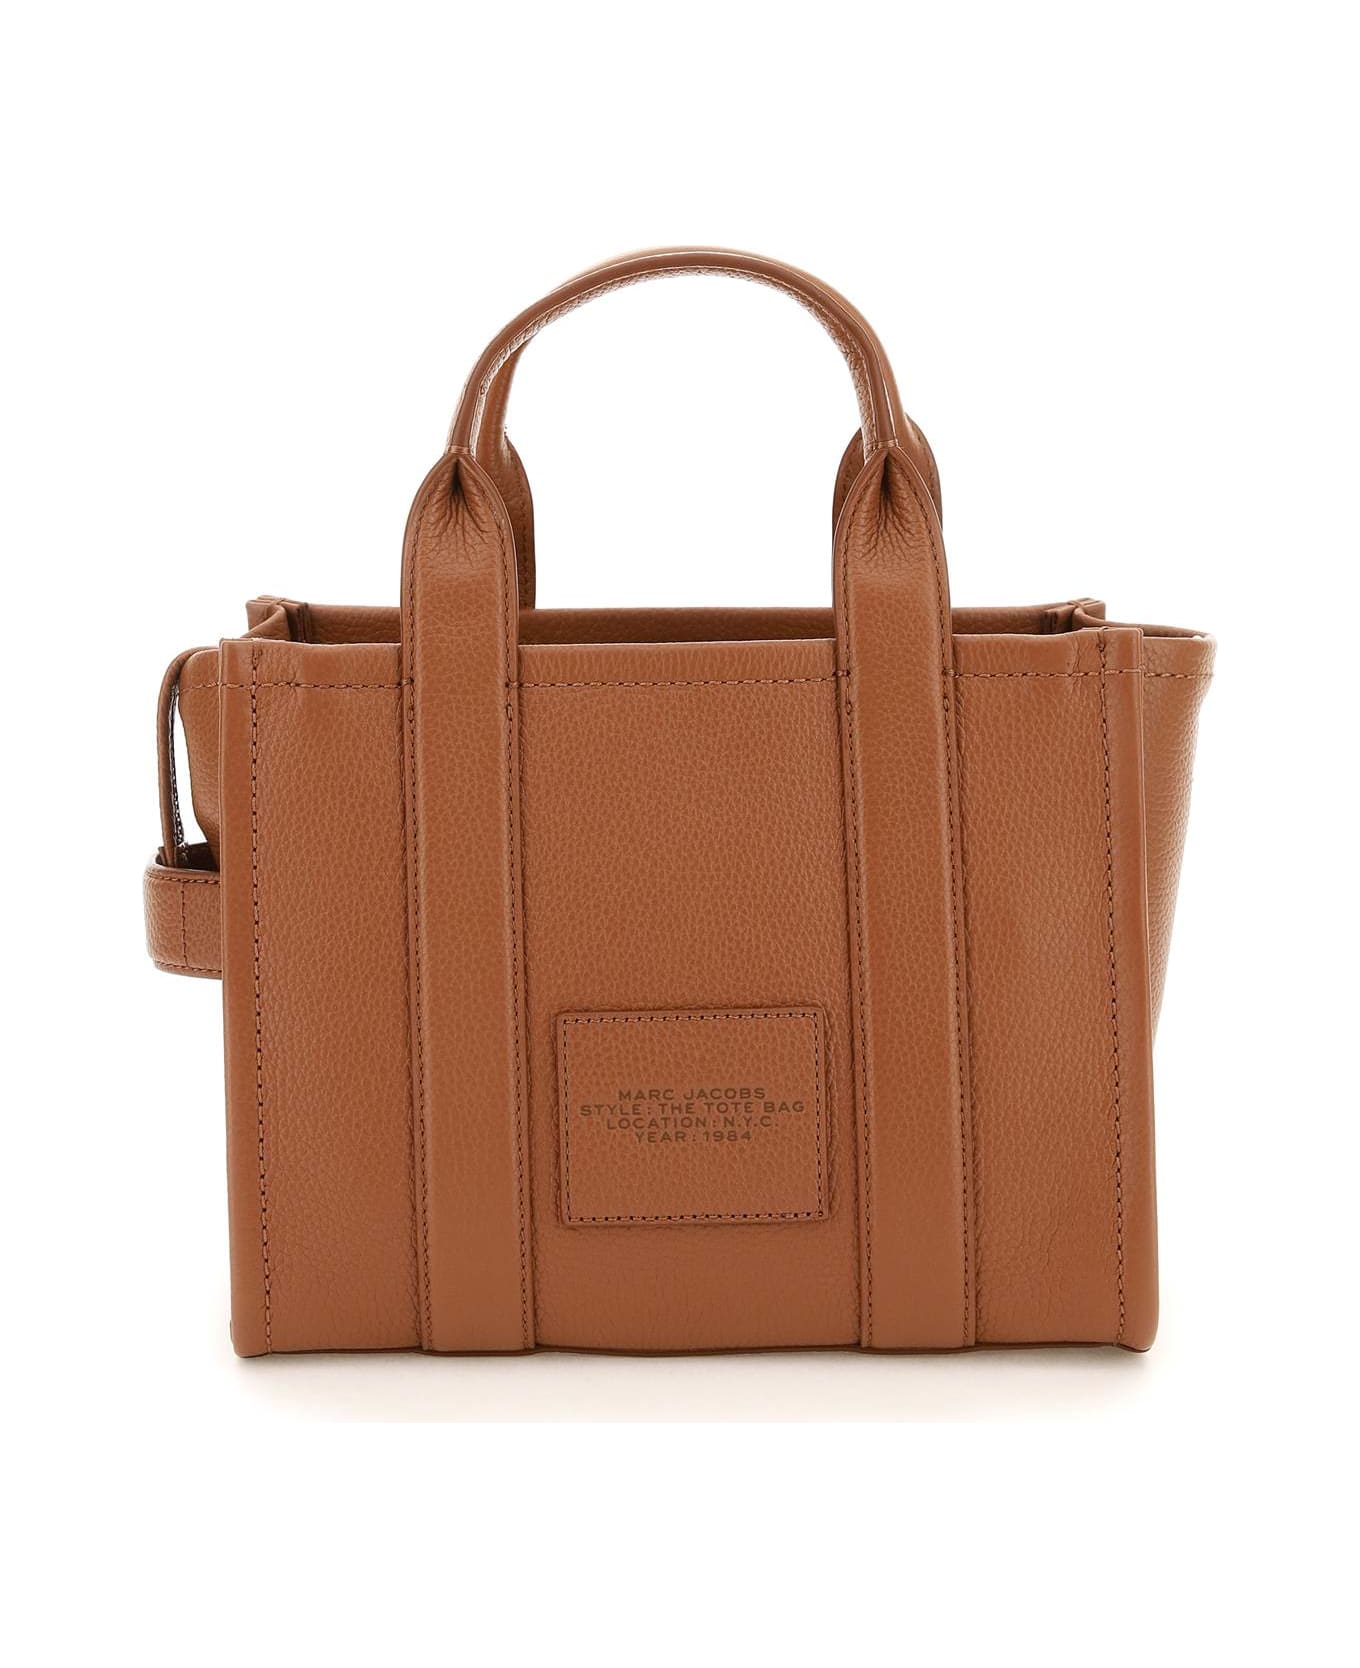 Marc Jacobs The Leather Small Tote Bag - Brown トートバッグ